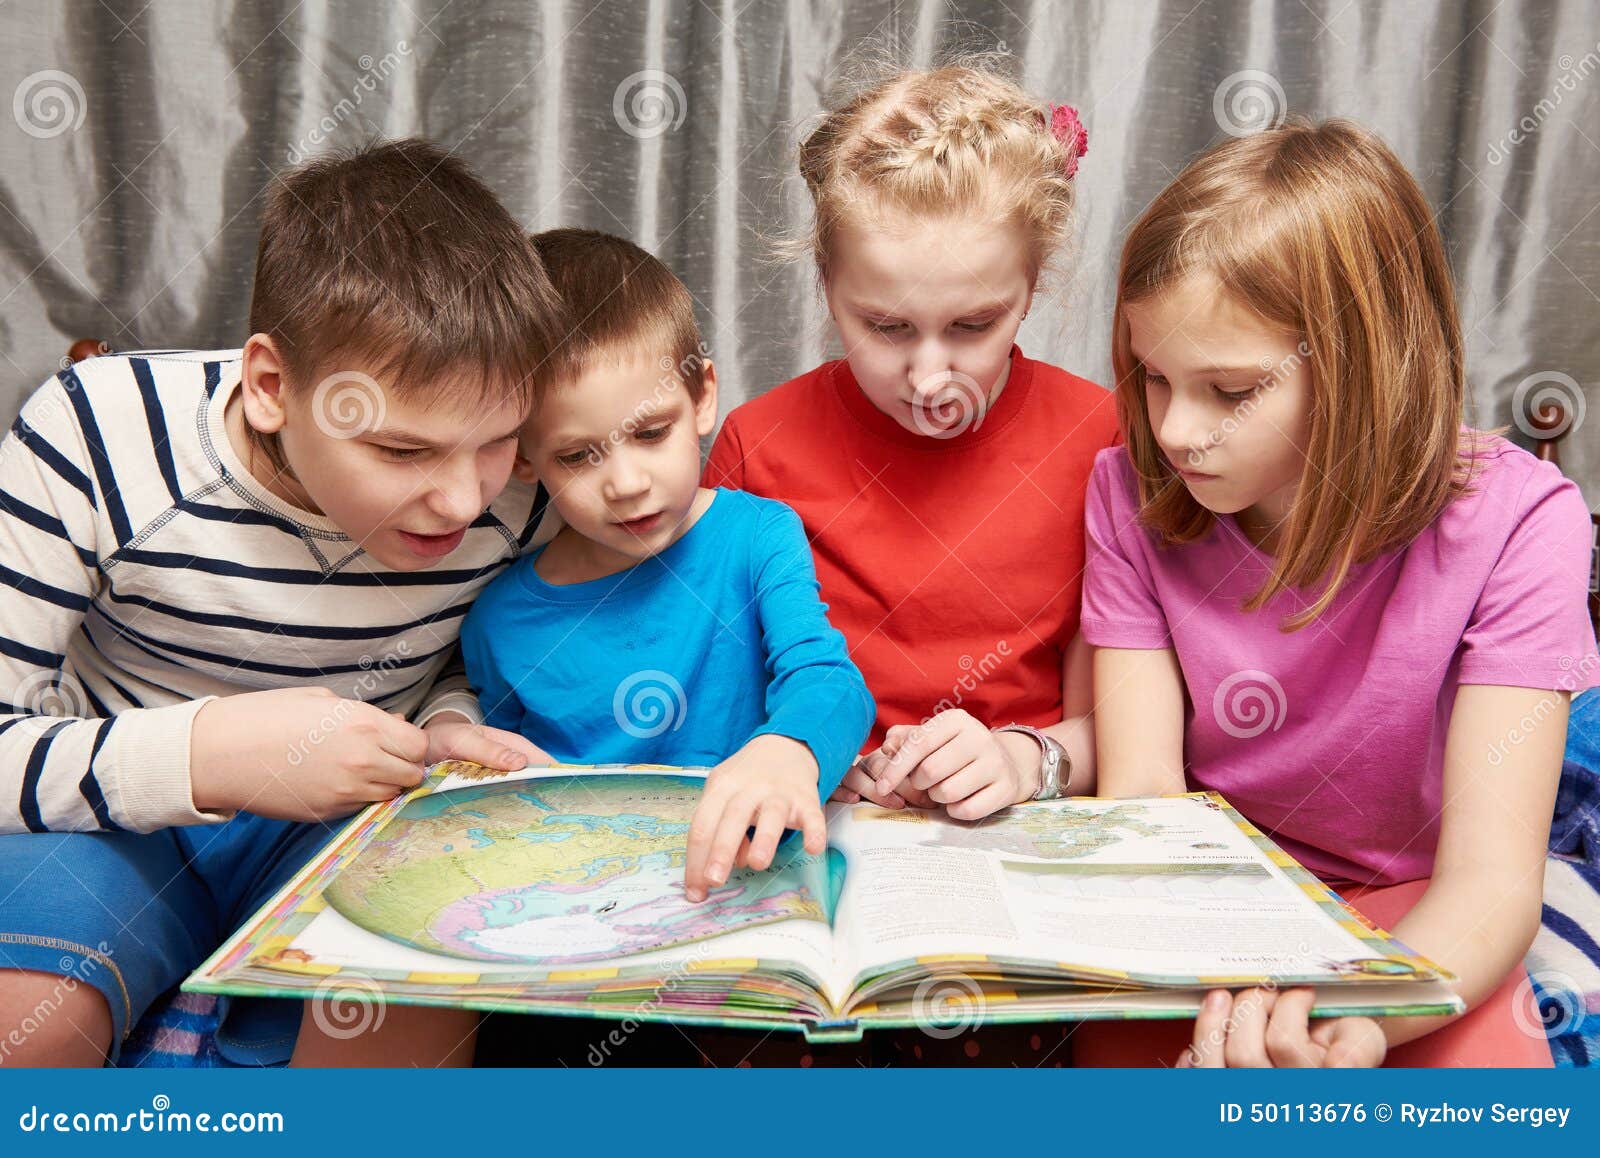 children sitting and reading geography book